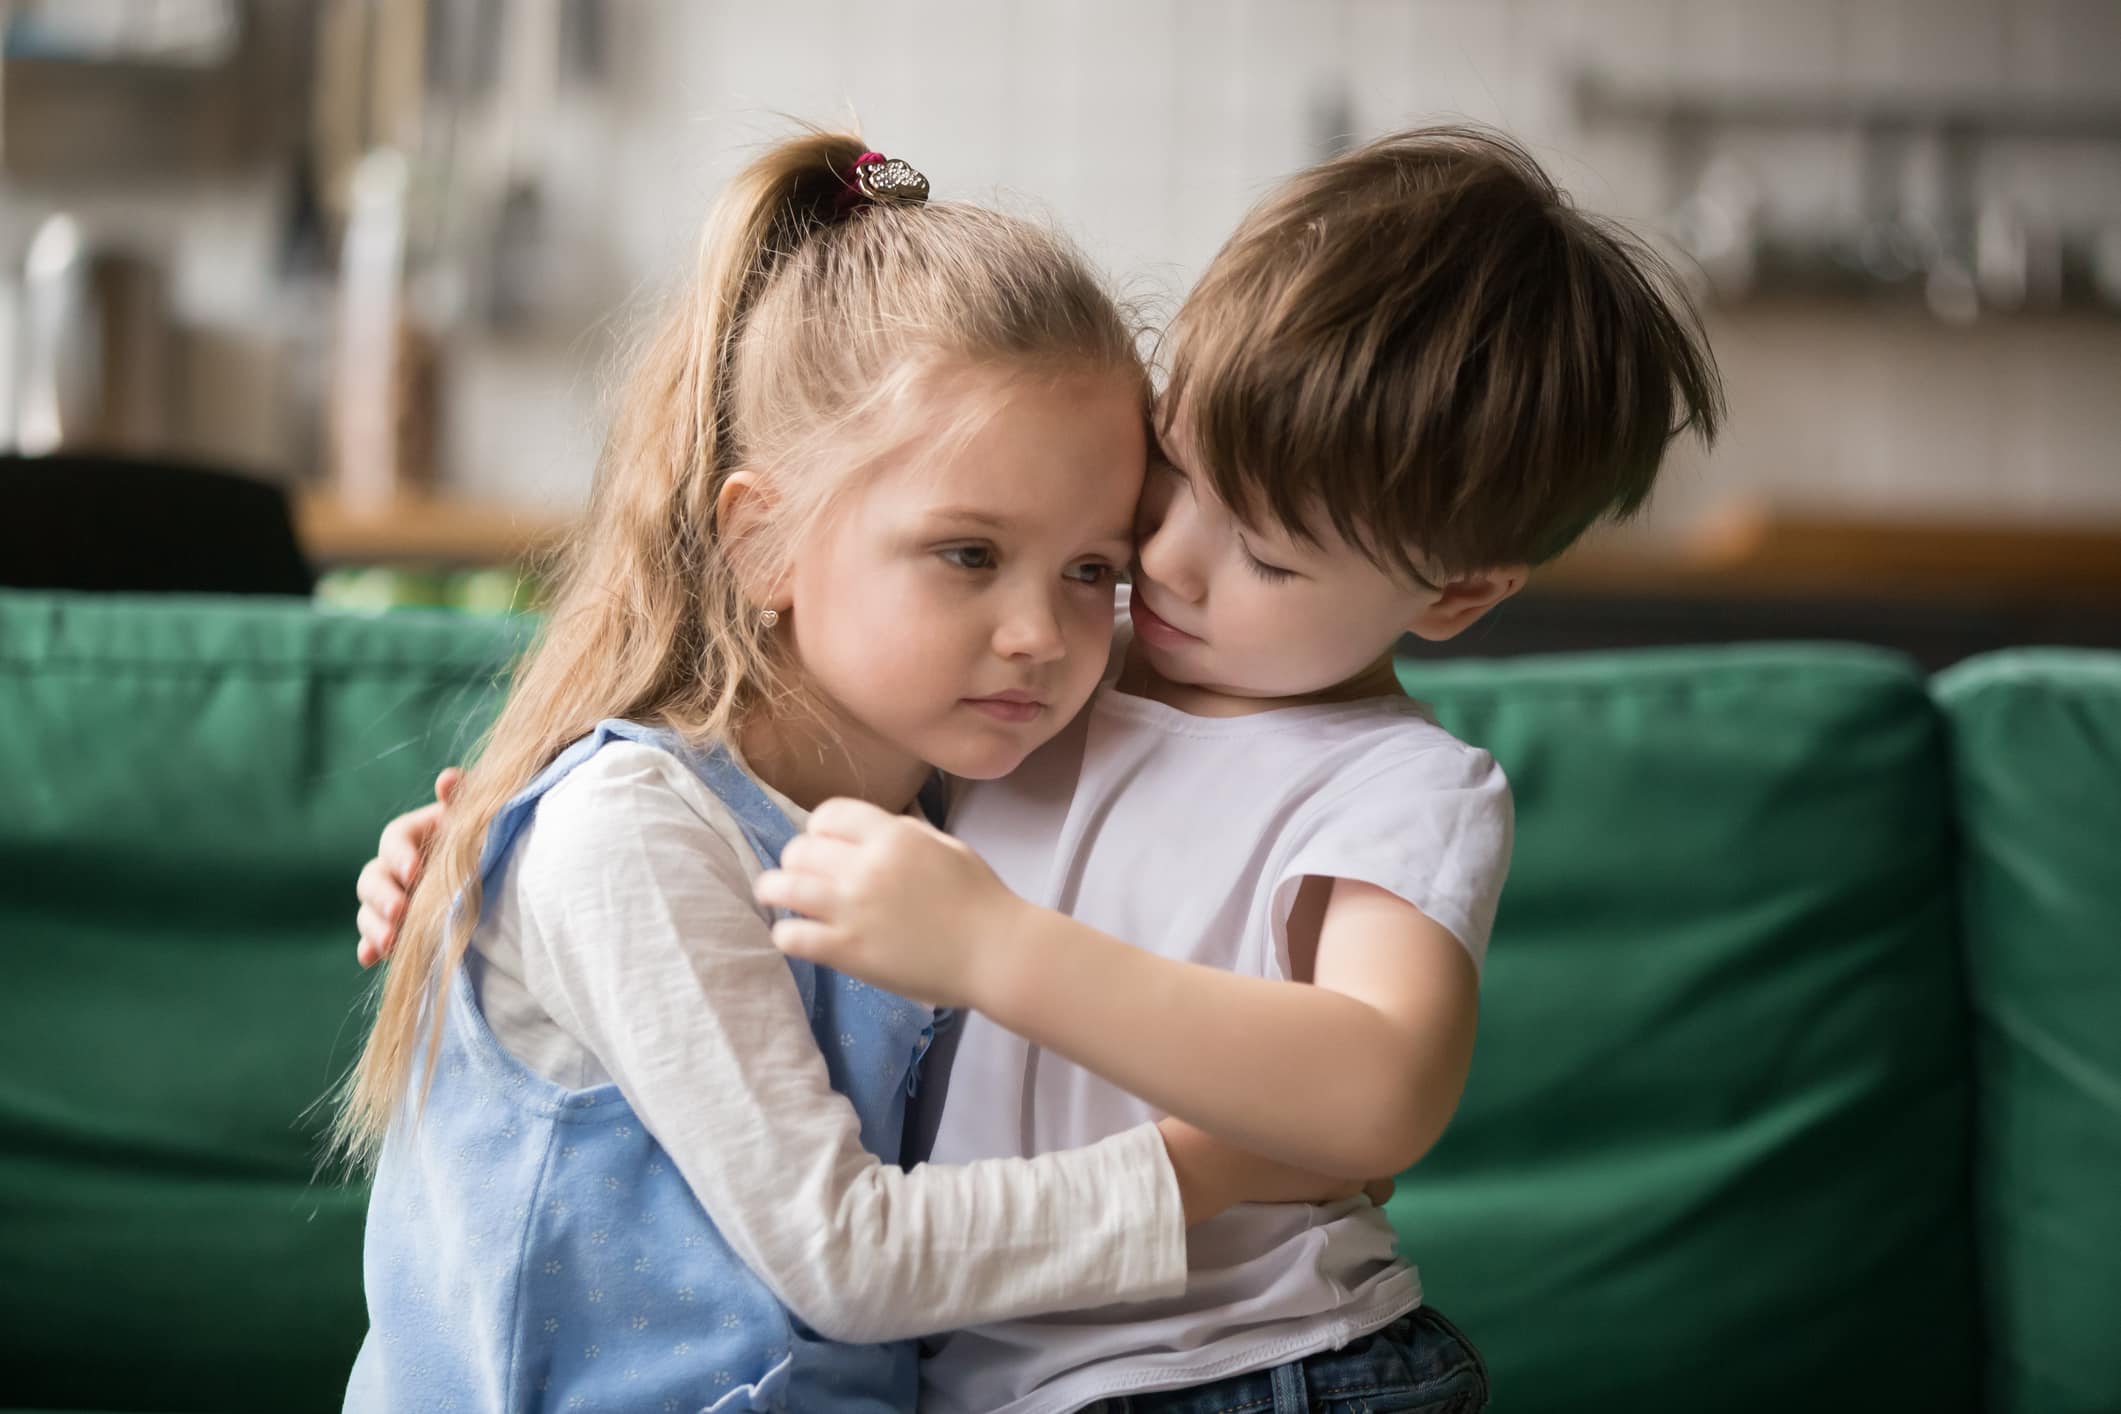 Little boy hugging consoling upset girl sitting on sofa, kid brother embracing sad sister apologizing or comforting, siblings friendship, preschool children good relationships and support concept